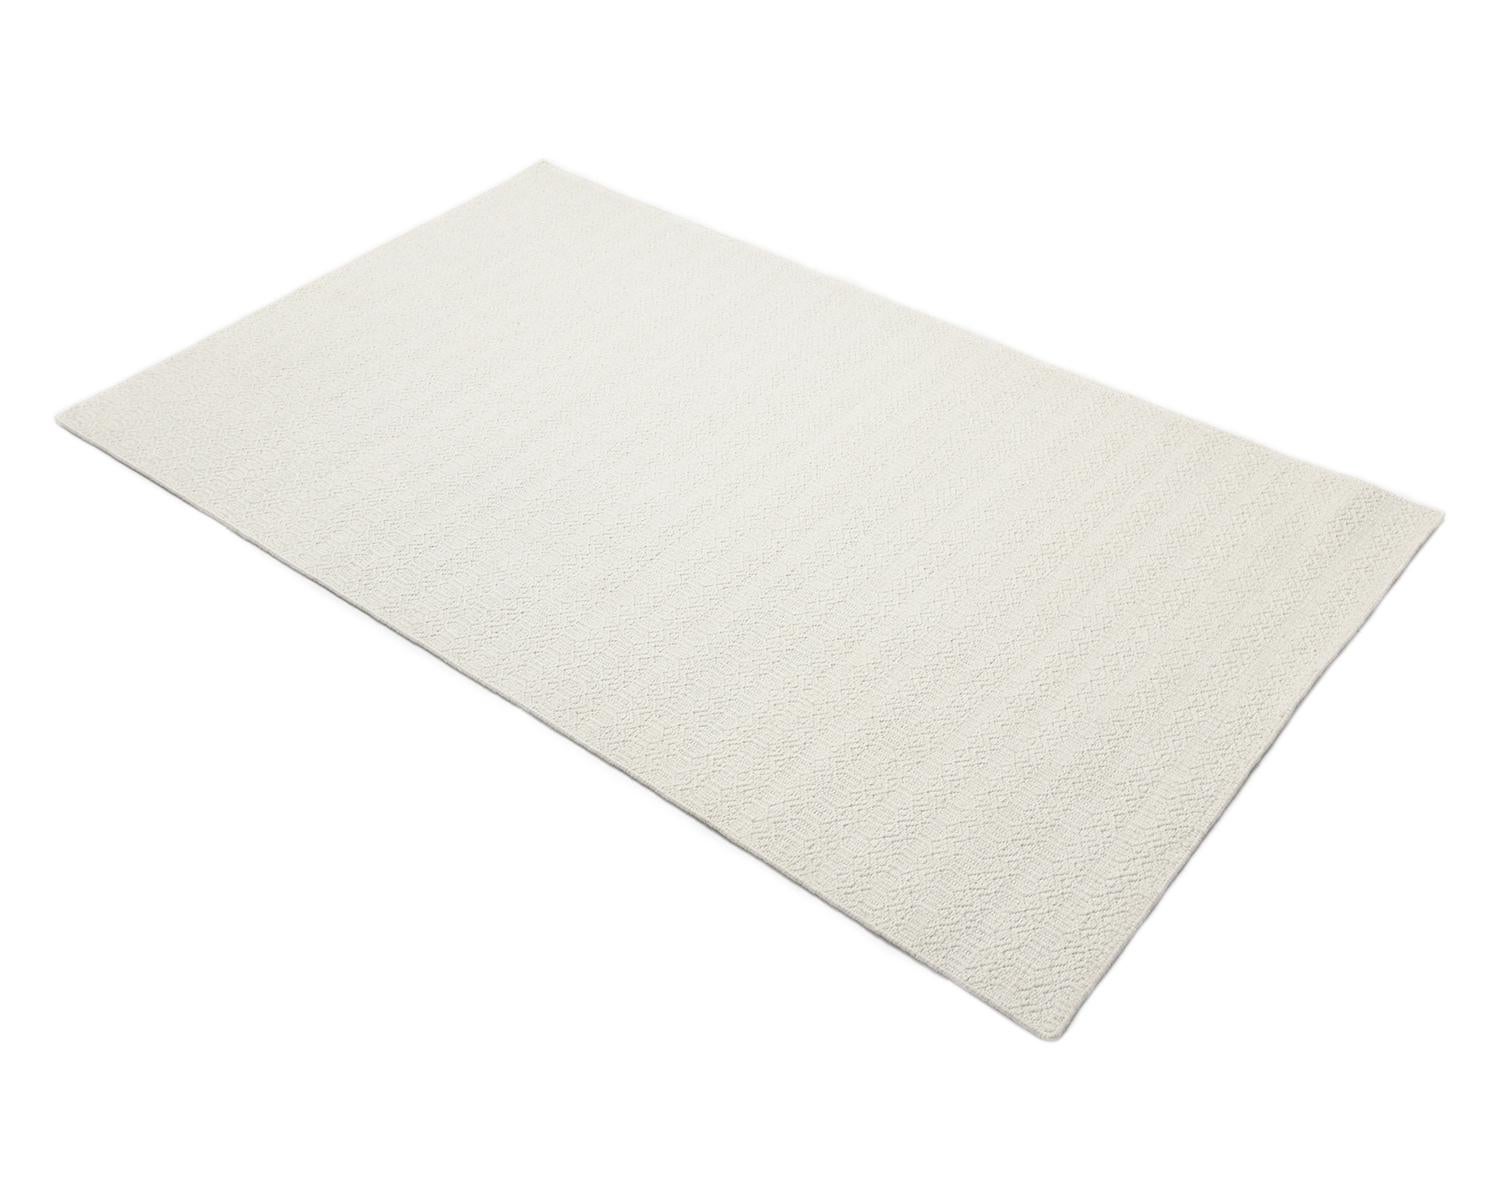 Wool Chatham, Transitional Flat-Weave Handwoven Area Rug, Ivory For Sale